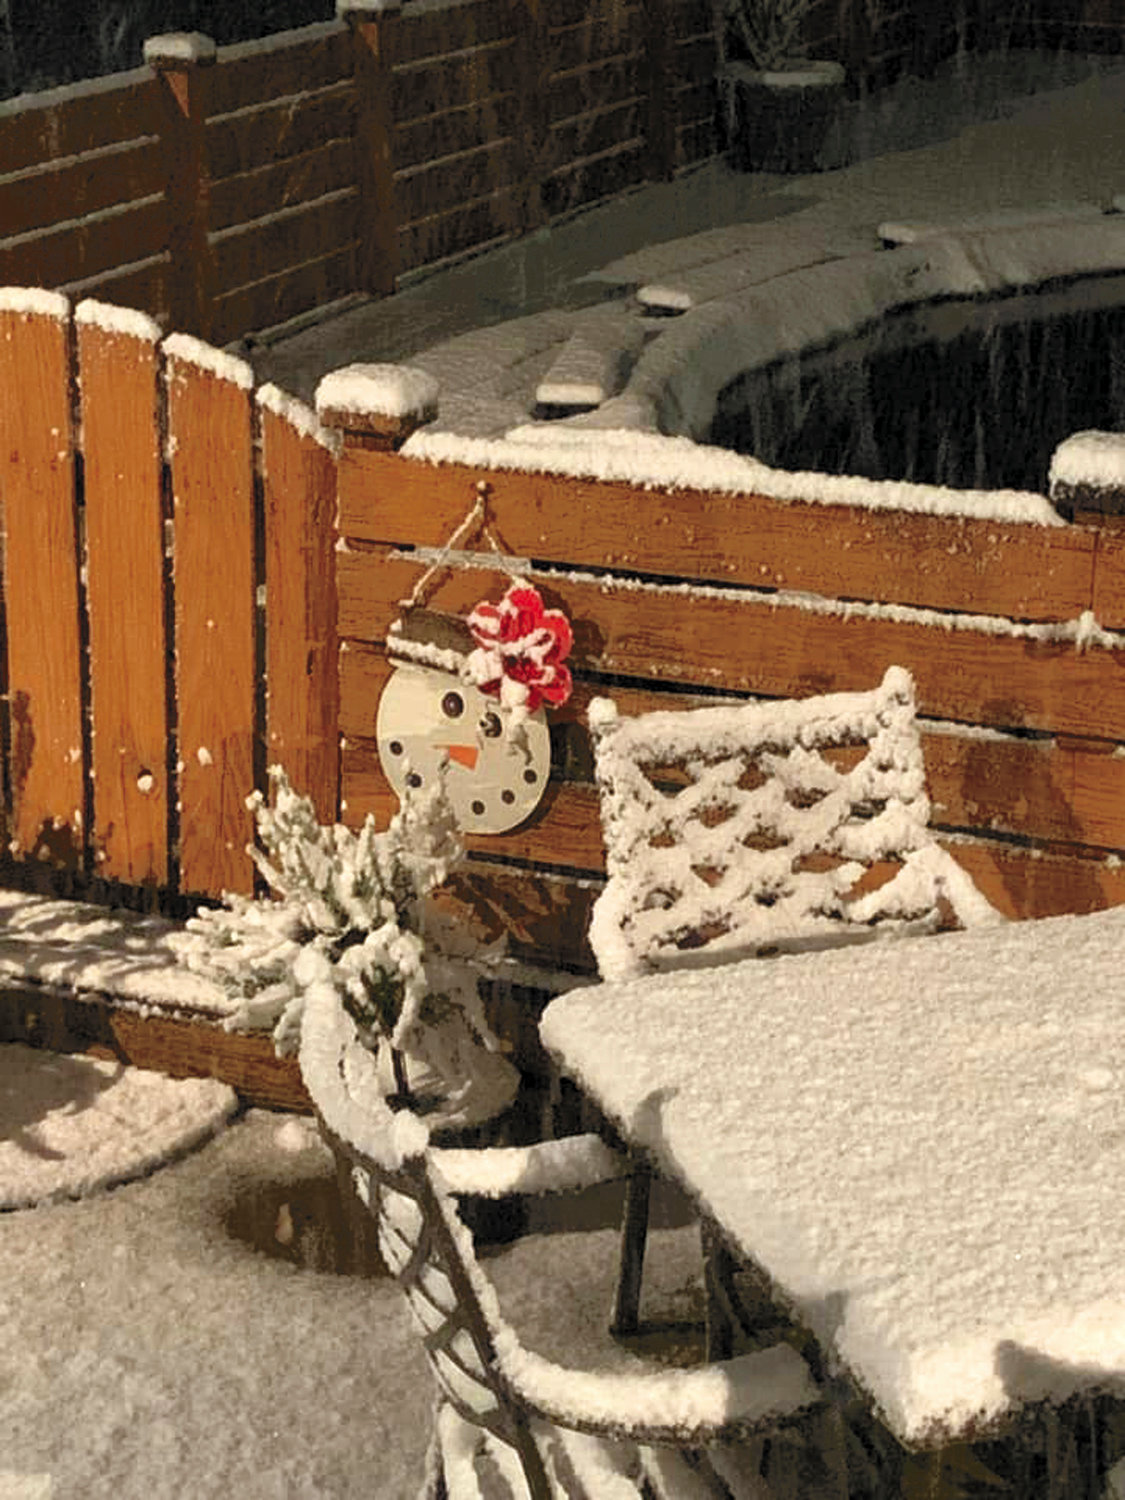 This “snowman” hangs around with actual snow.